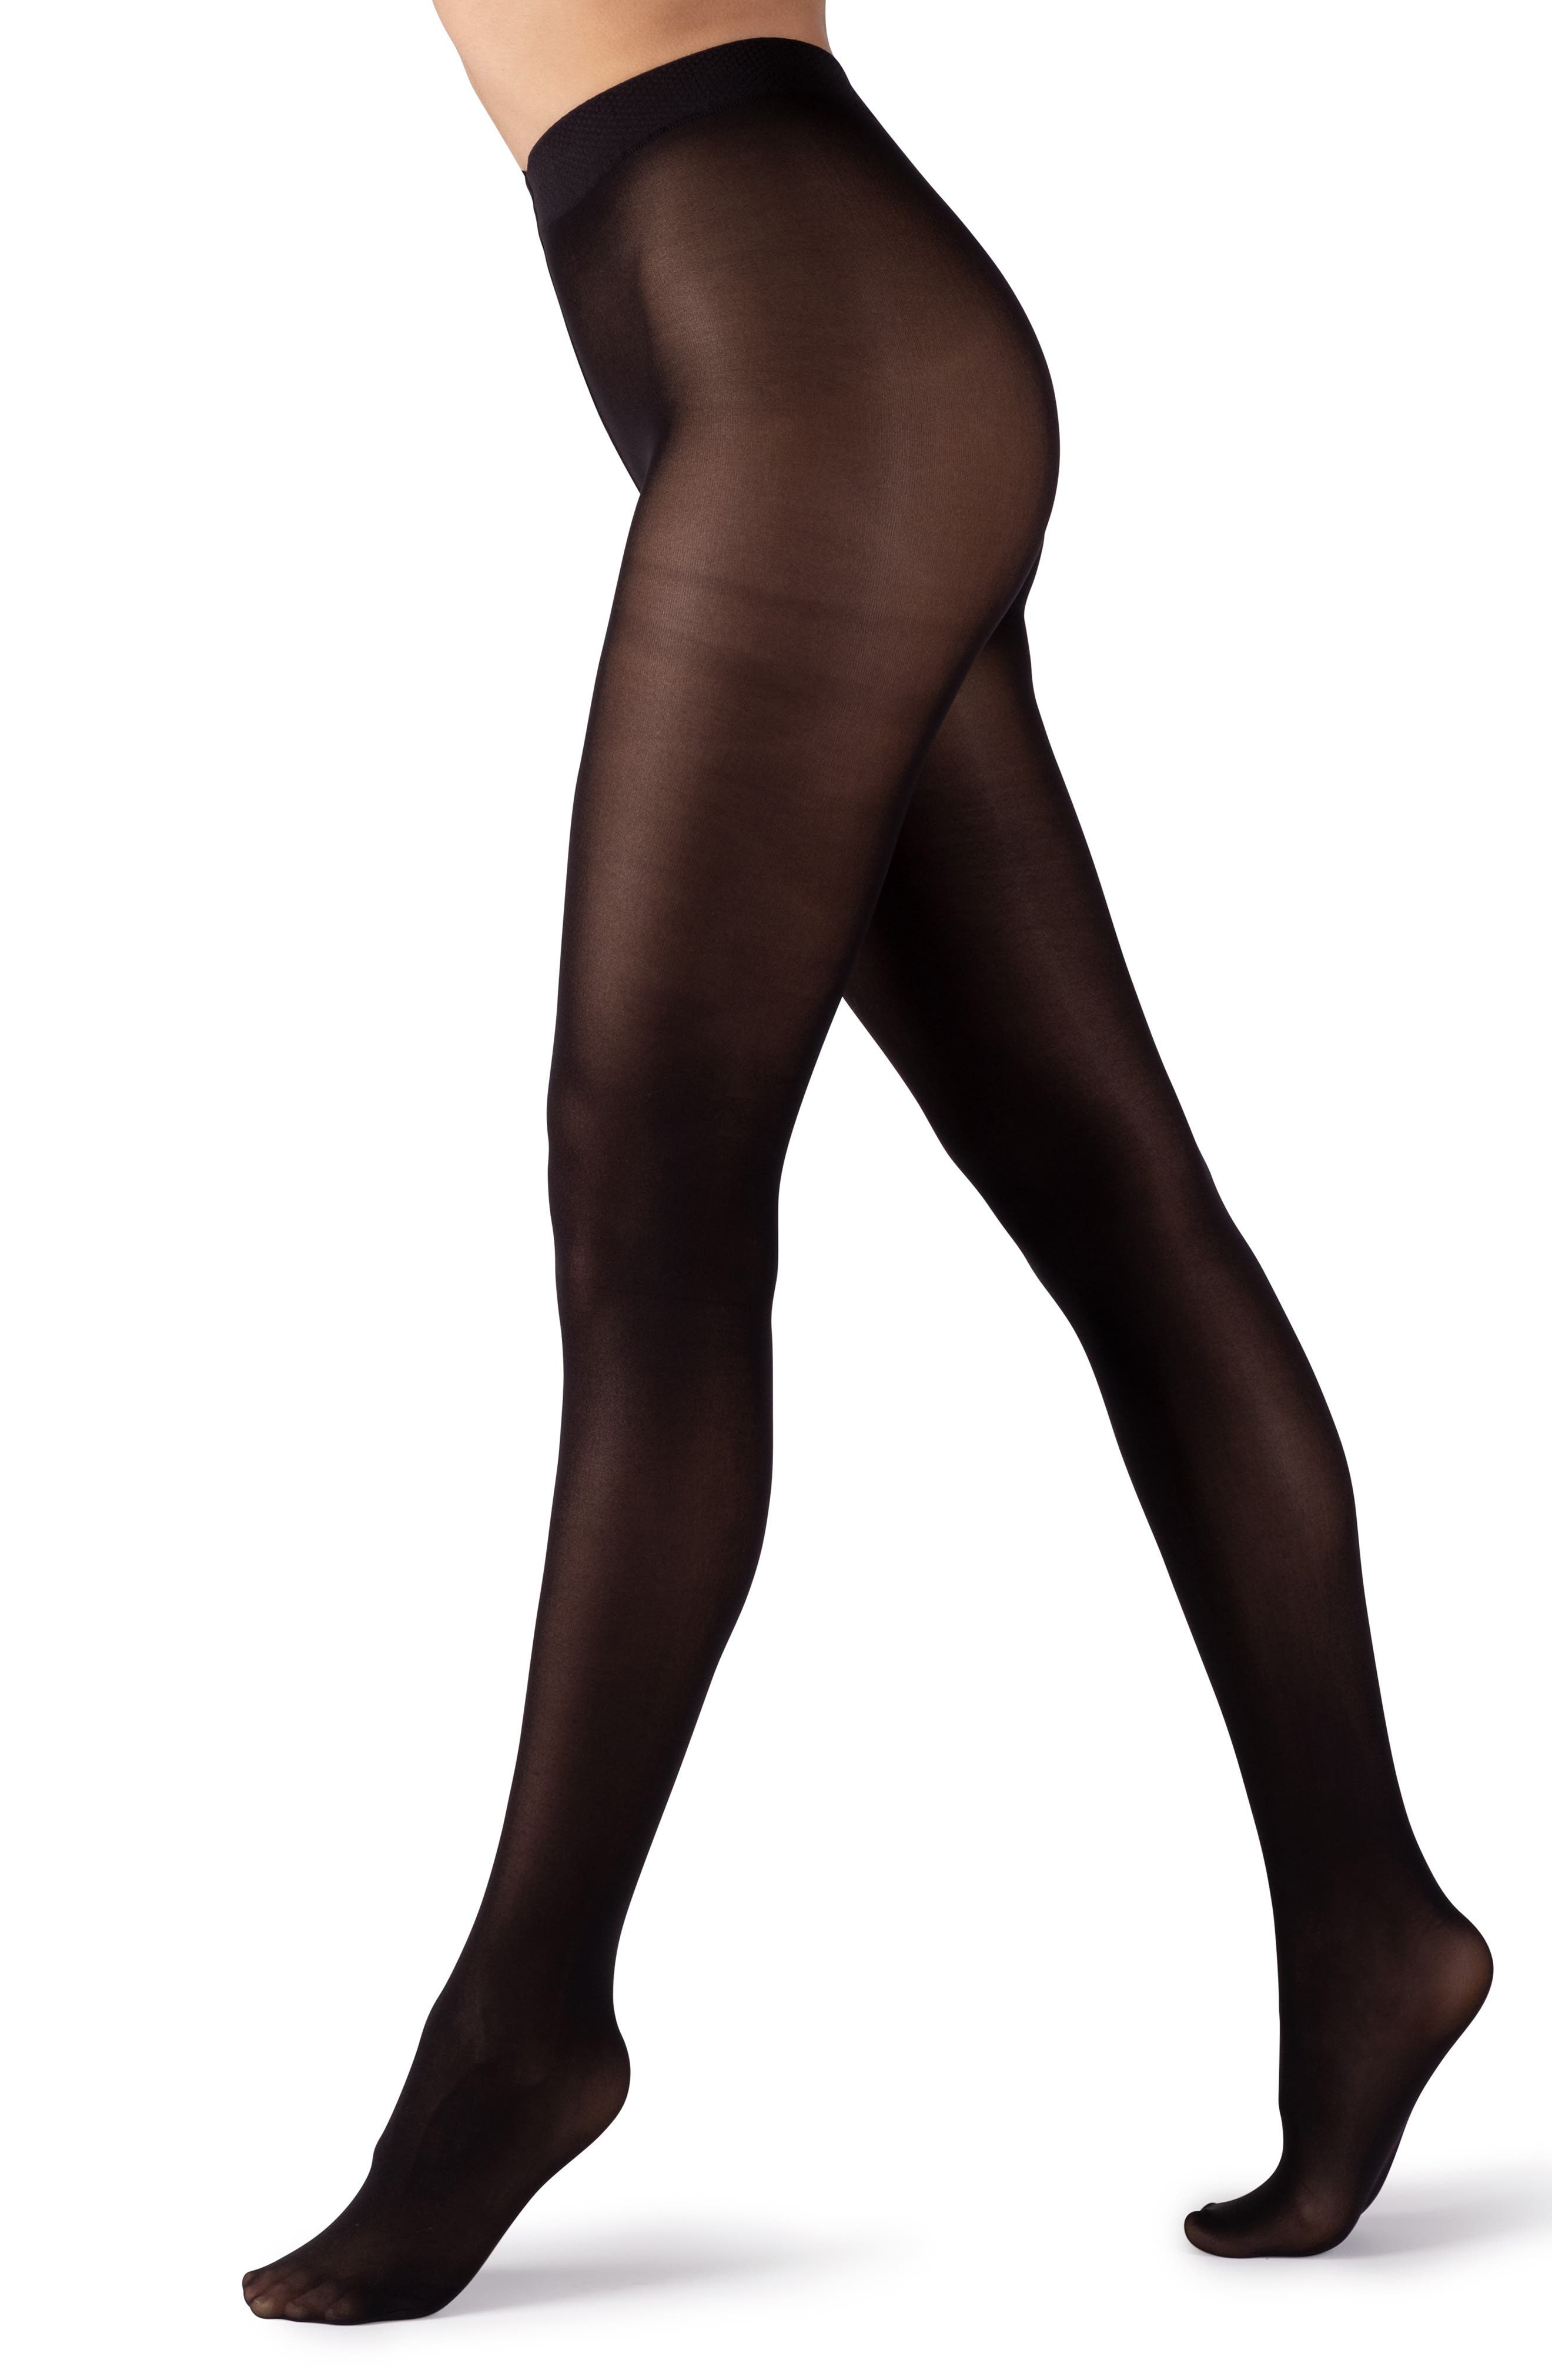 PLUS SIZE LX 1X NUDE SHEER WOVEN BLACK POLKA HEART DOTS TIGHTS BY NORDSTROM NIB